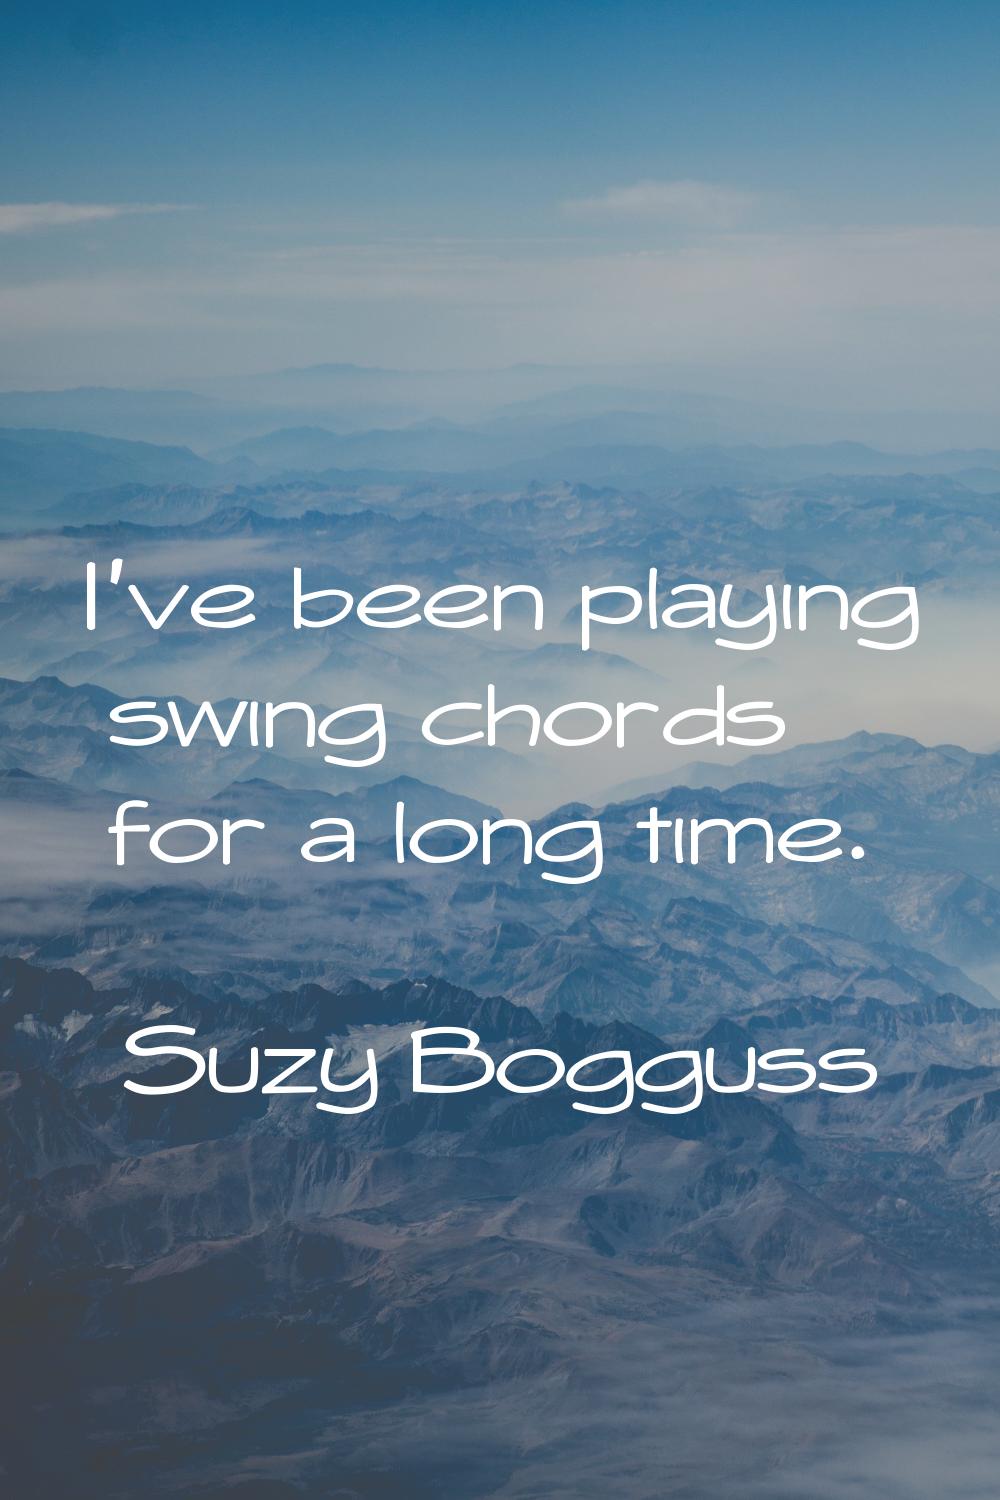 I've been playing swing chords for a long time.